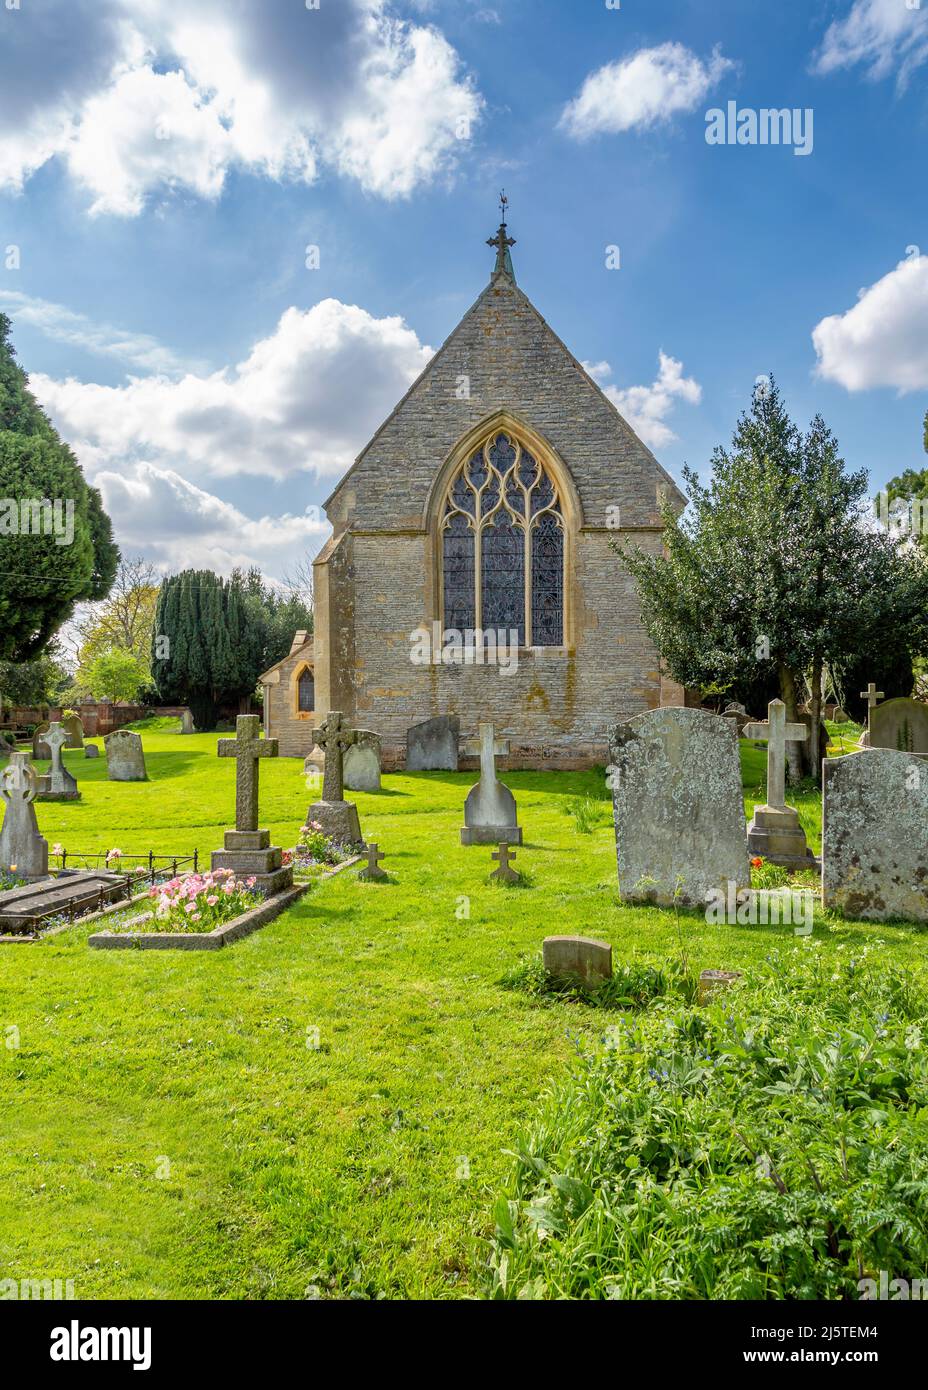 St. James the Great church in Harvington, Evesham, Worcestershire. Stock Photo